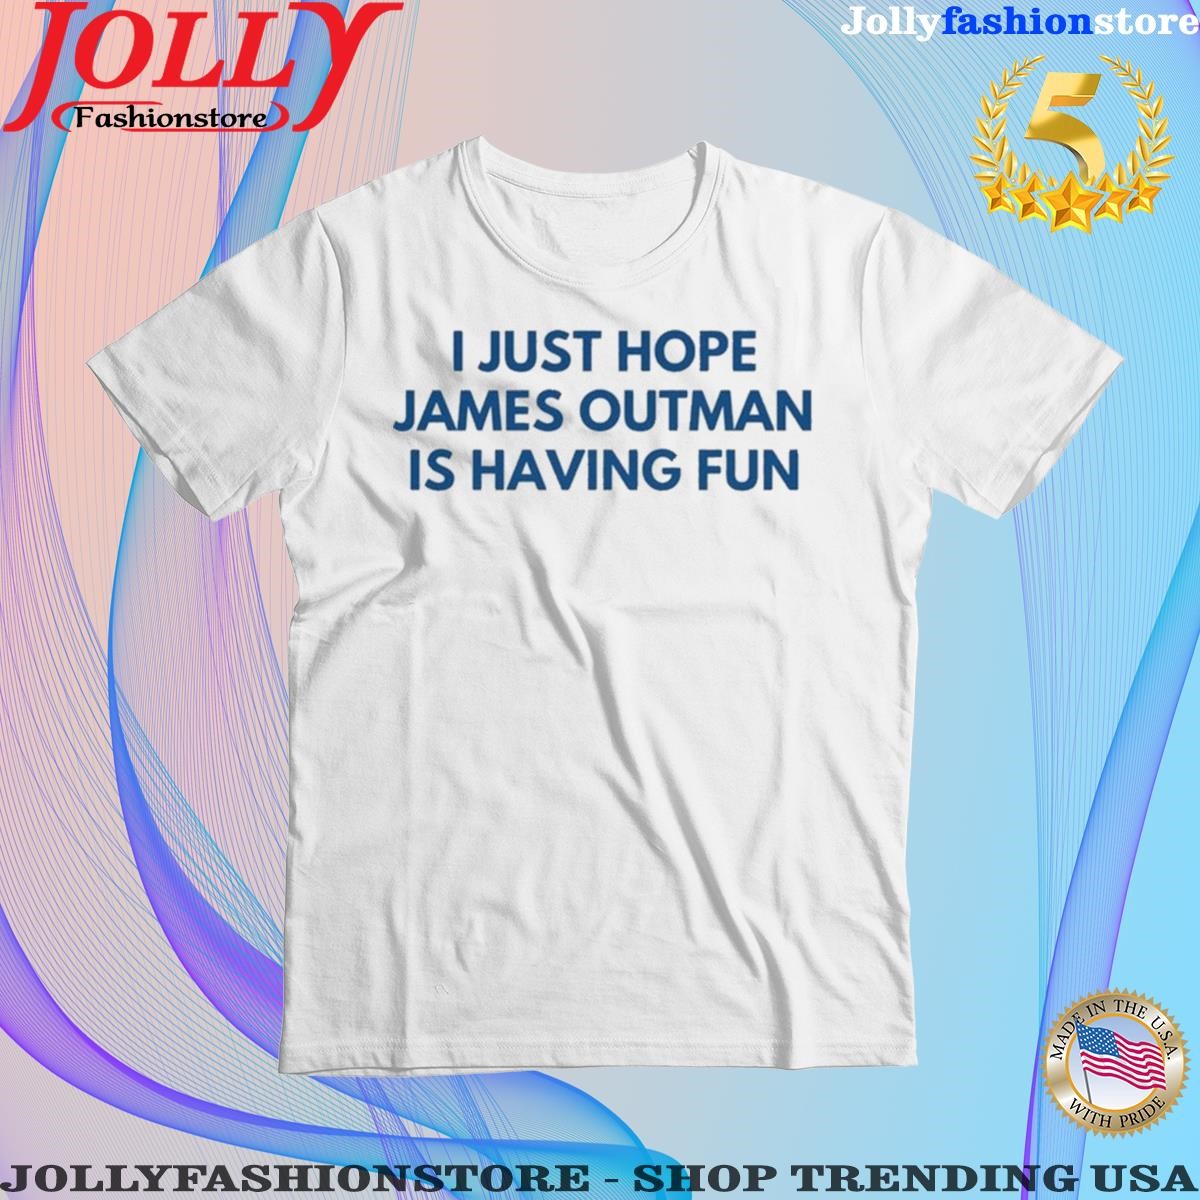 I just hope james outman is having fun Shirt